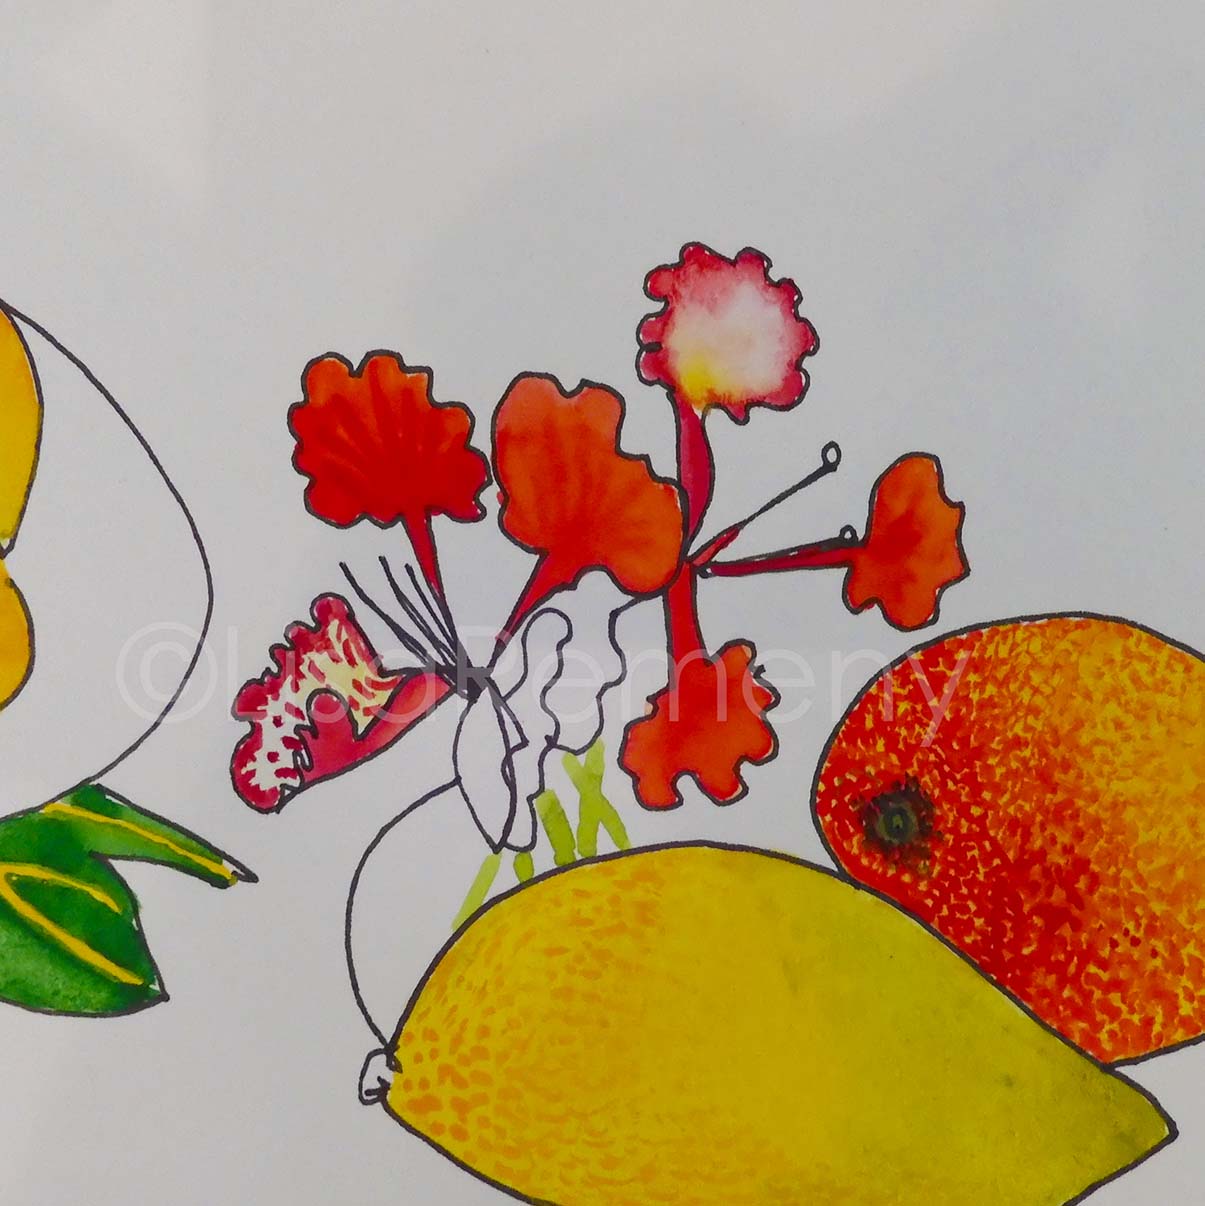 Watercolor & Ink on Paper - Still Life With Mangoes and Poinciana